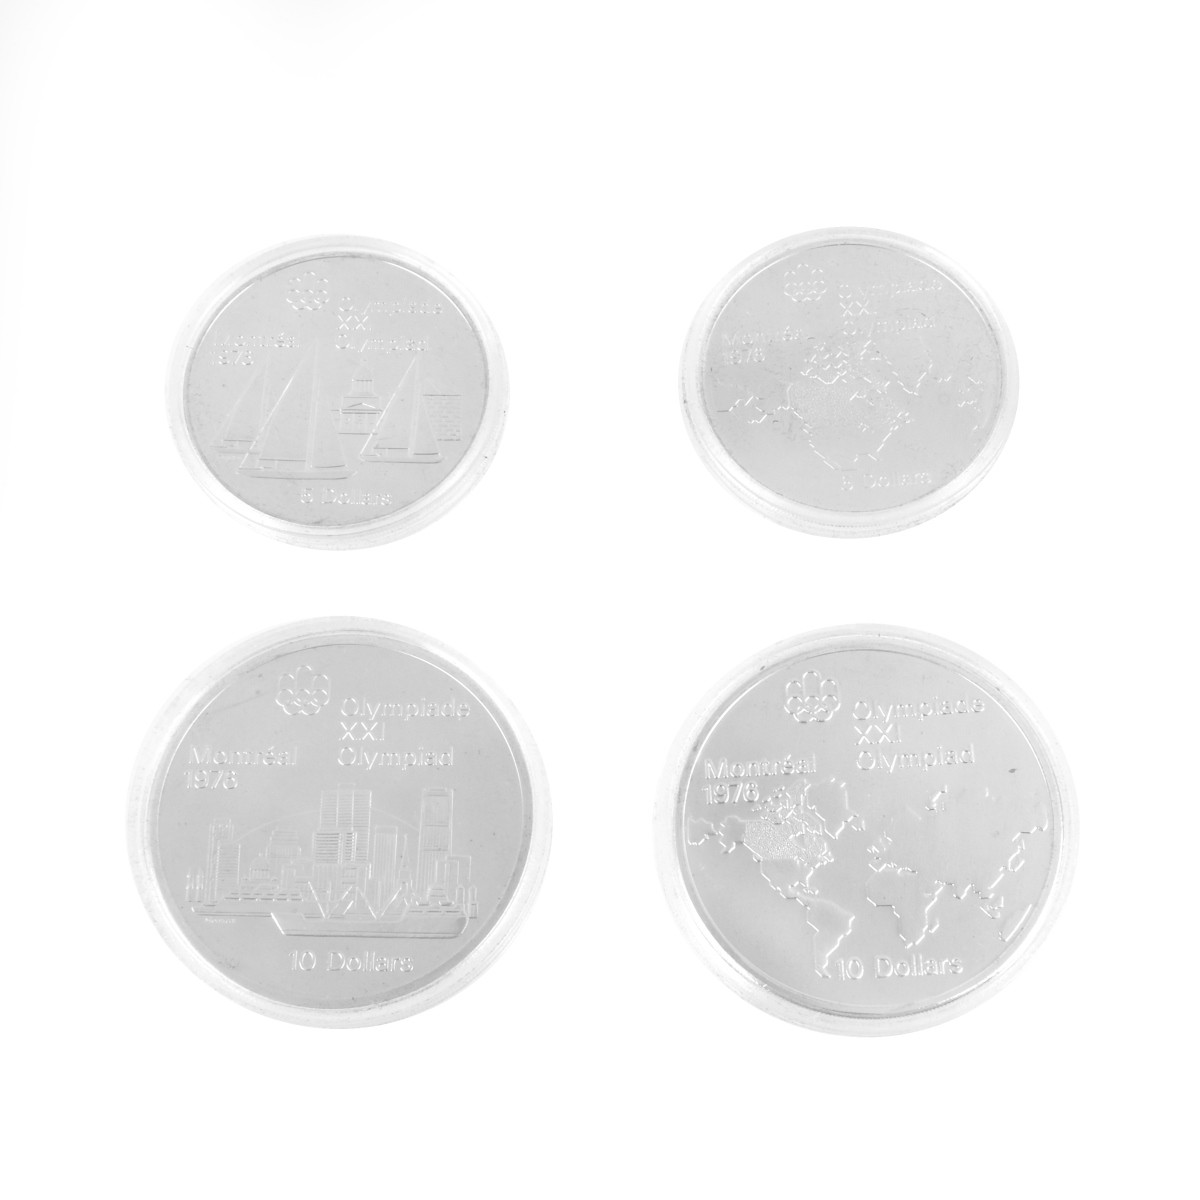 1976 Montreal Olympics Commemorative Coins